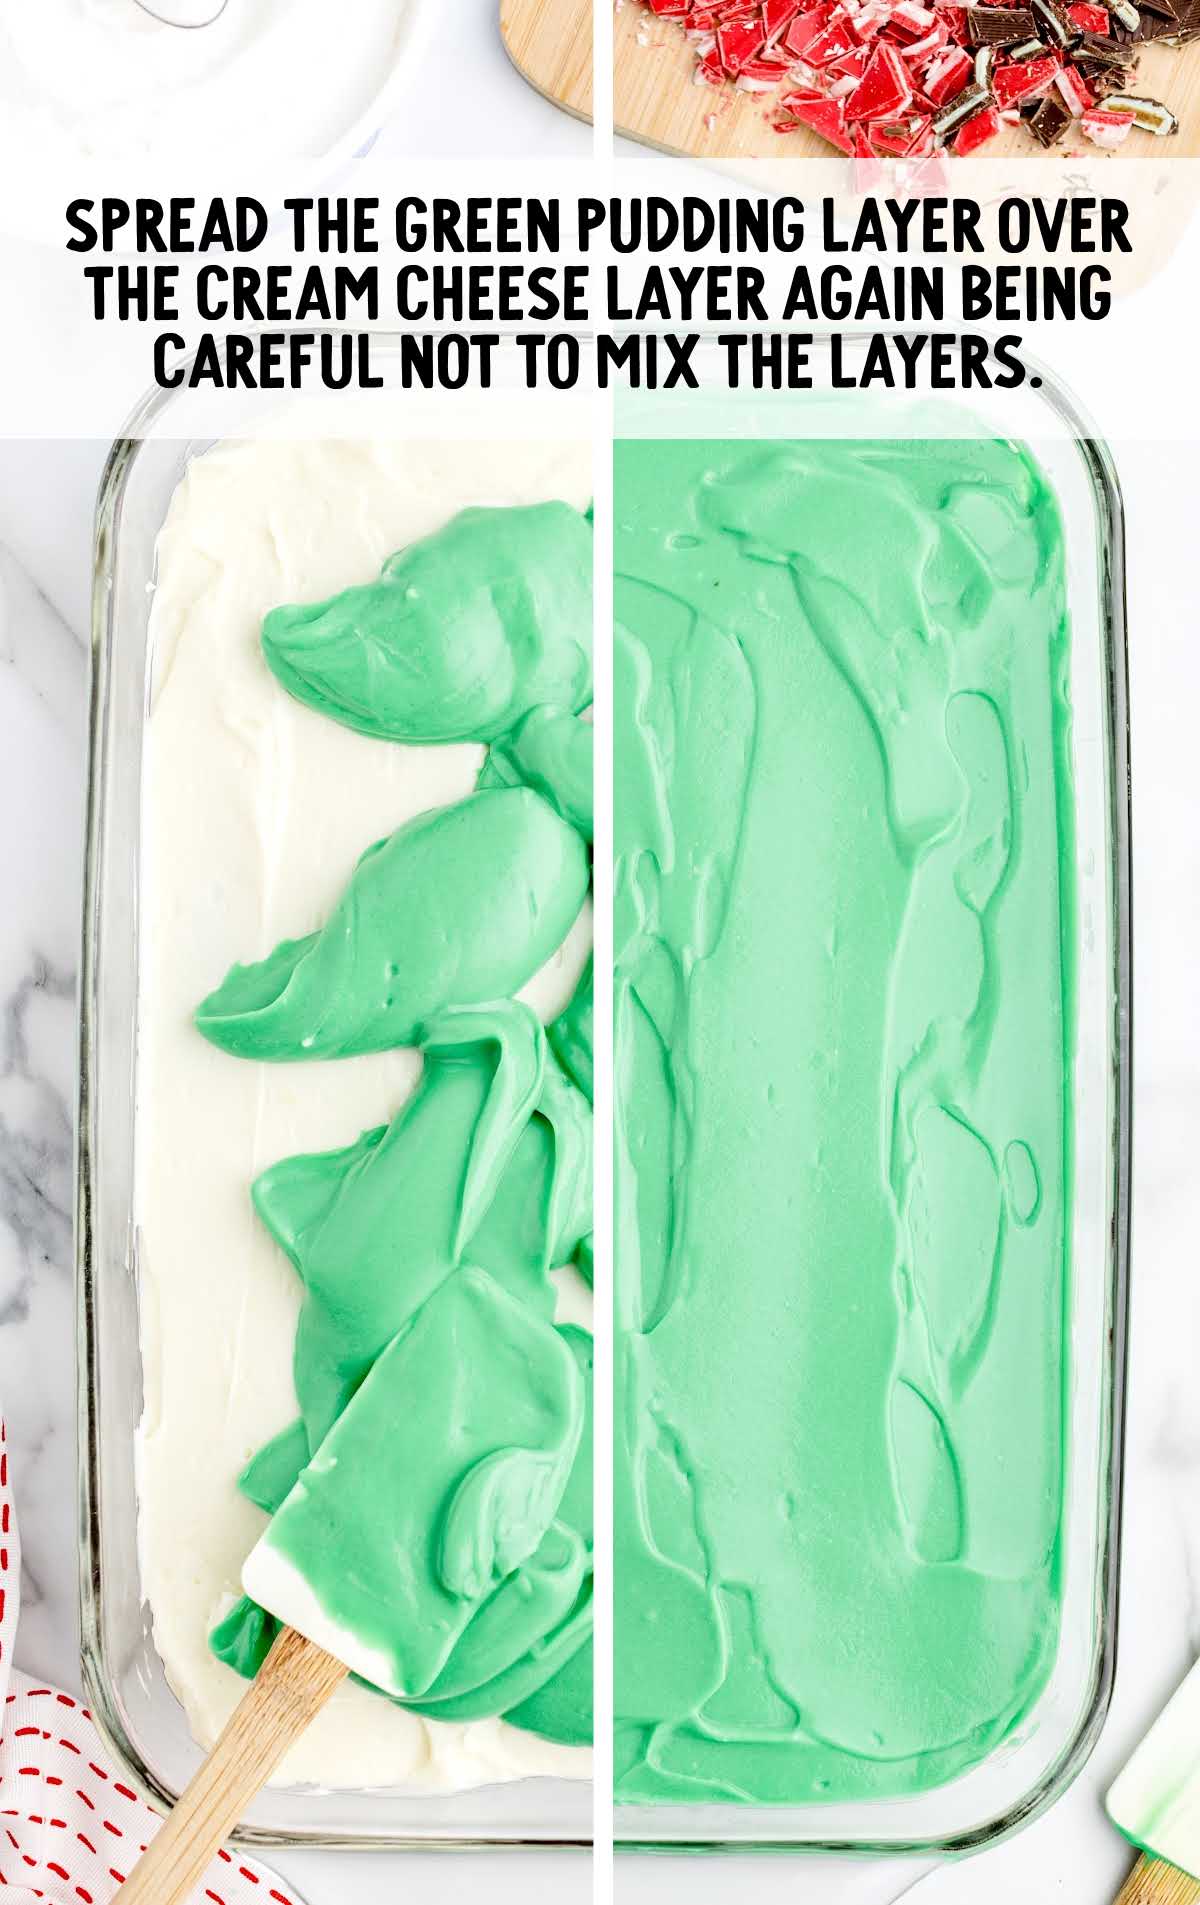 green pudding spread over the cream cheese layer in a baking dish